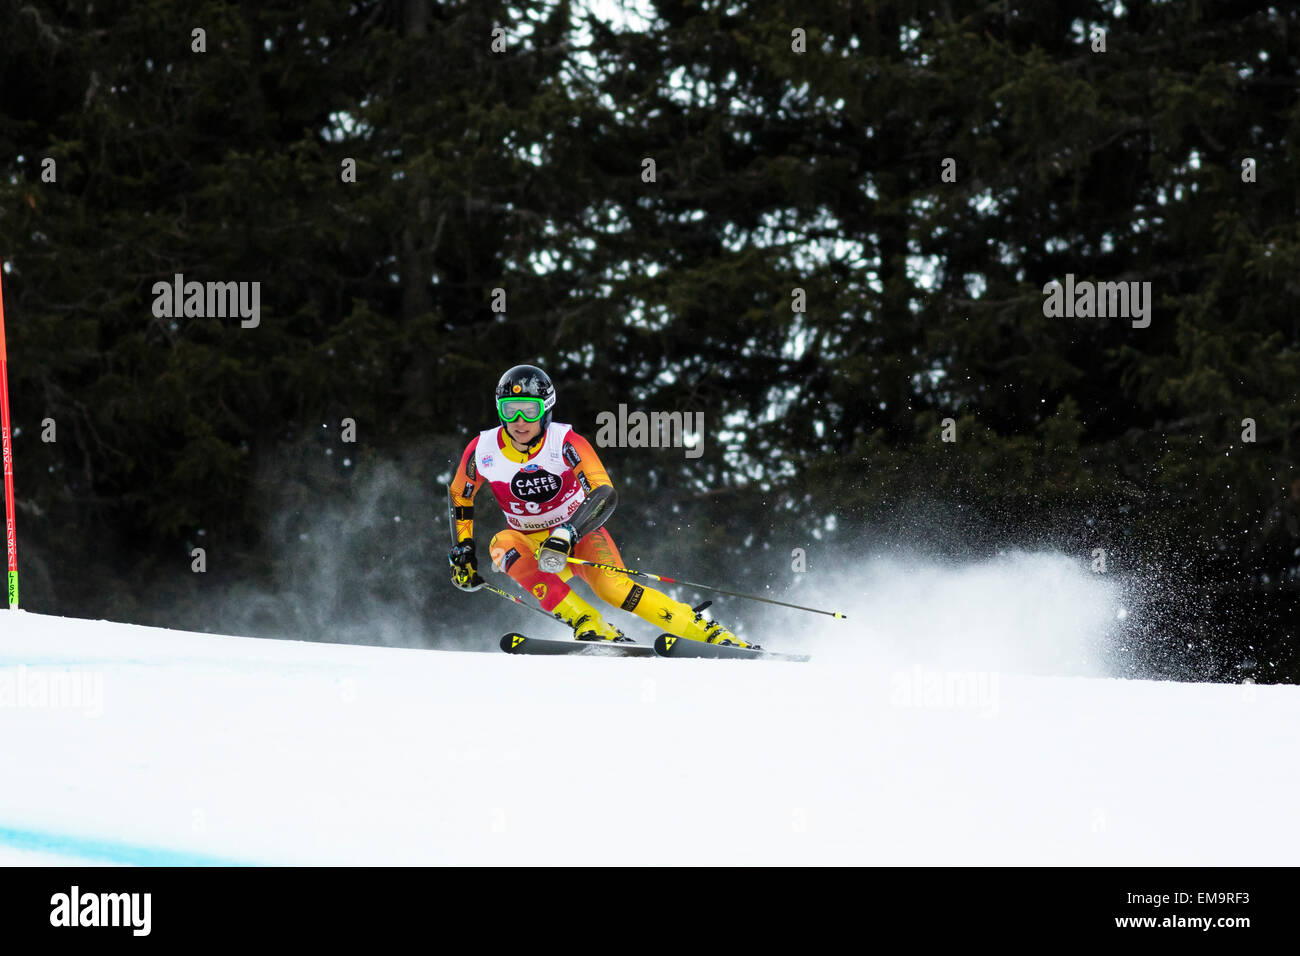 Val Badia, Italy 21 December 2014. READ Erik (Can) competing in the Audi Fis Alpine Skiing World Cup Men’s Giant Slalom Stock Photo